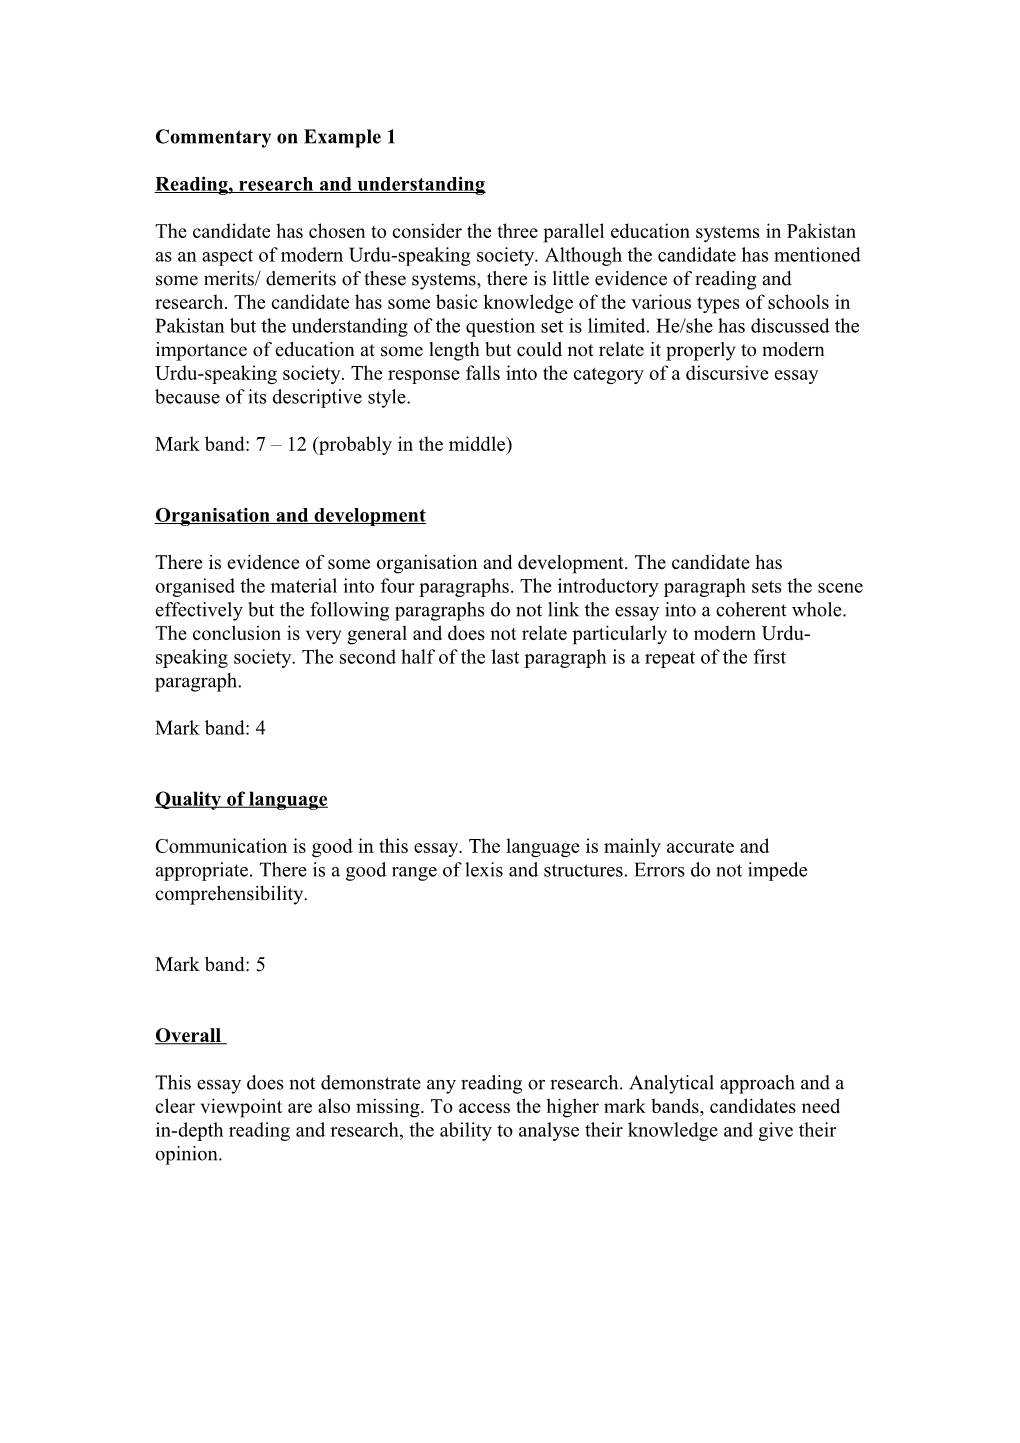 Essay Guides - Commentary on Example 1